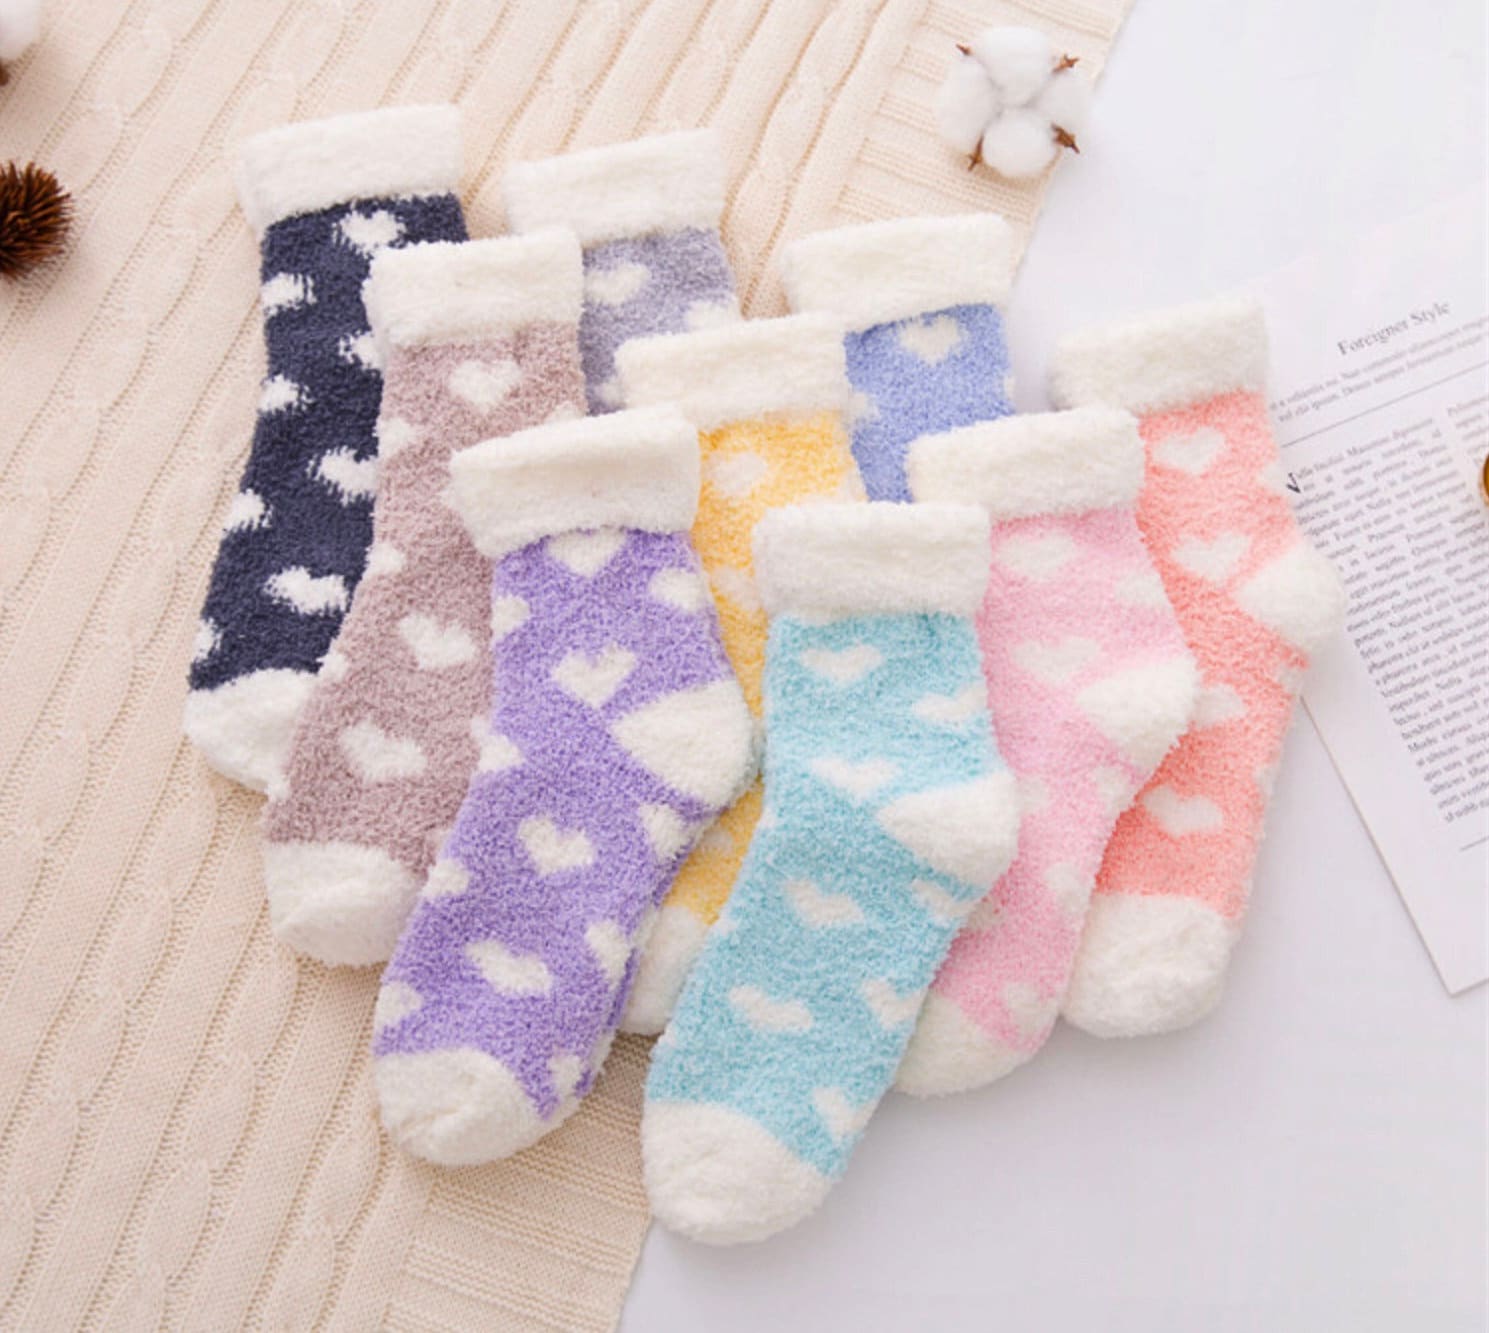 Luxe Cozy Fuzzy Socks With Hearts Add to Your Build A Box & Create a  Personalized Custom Gift Box 